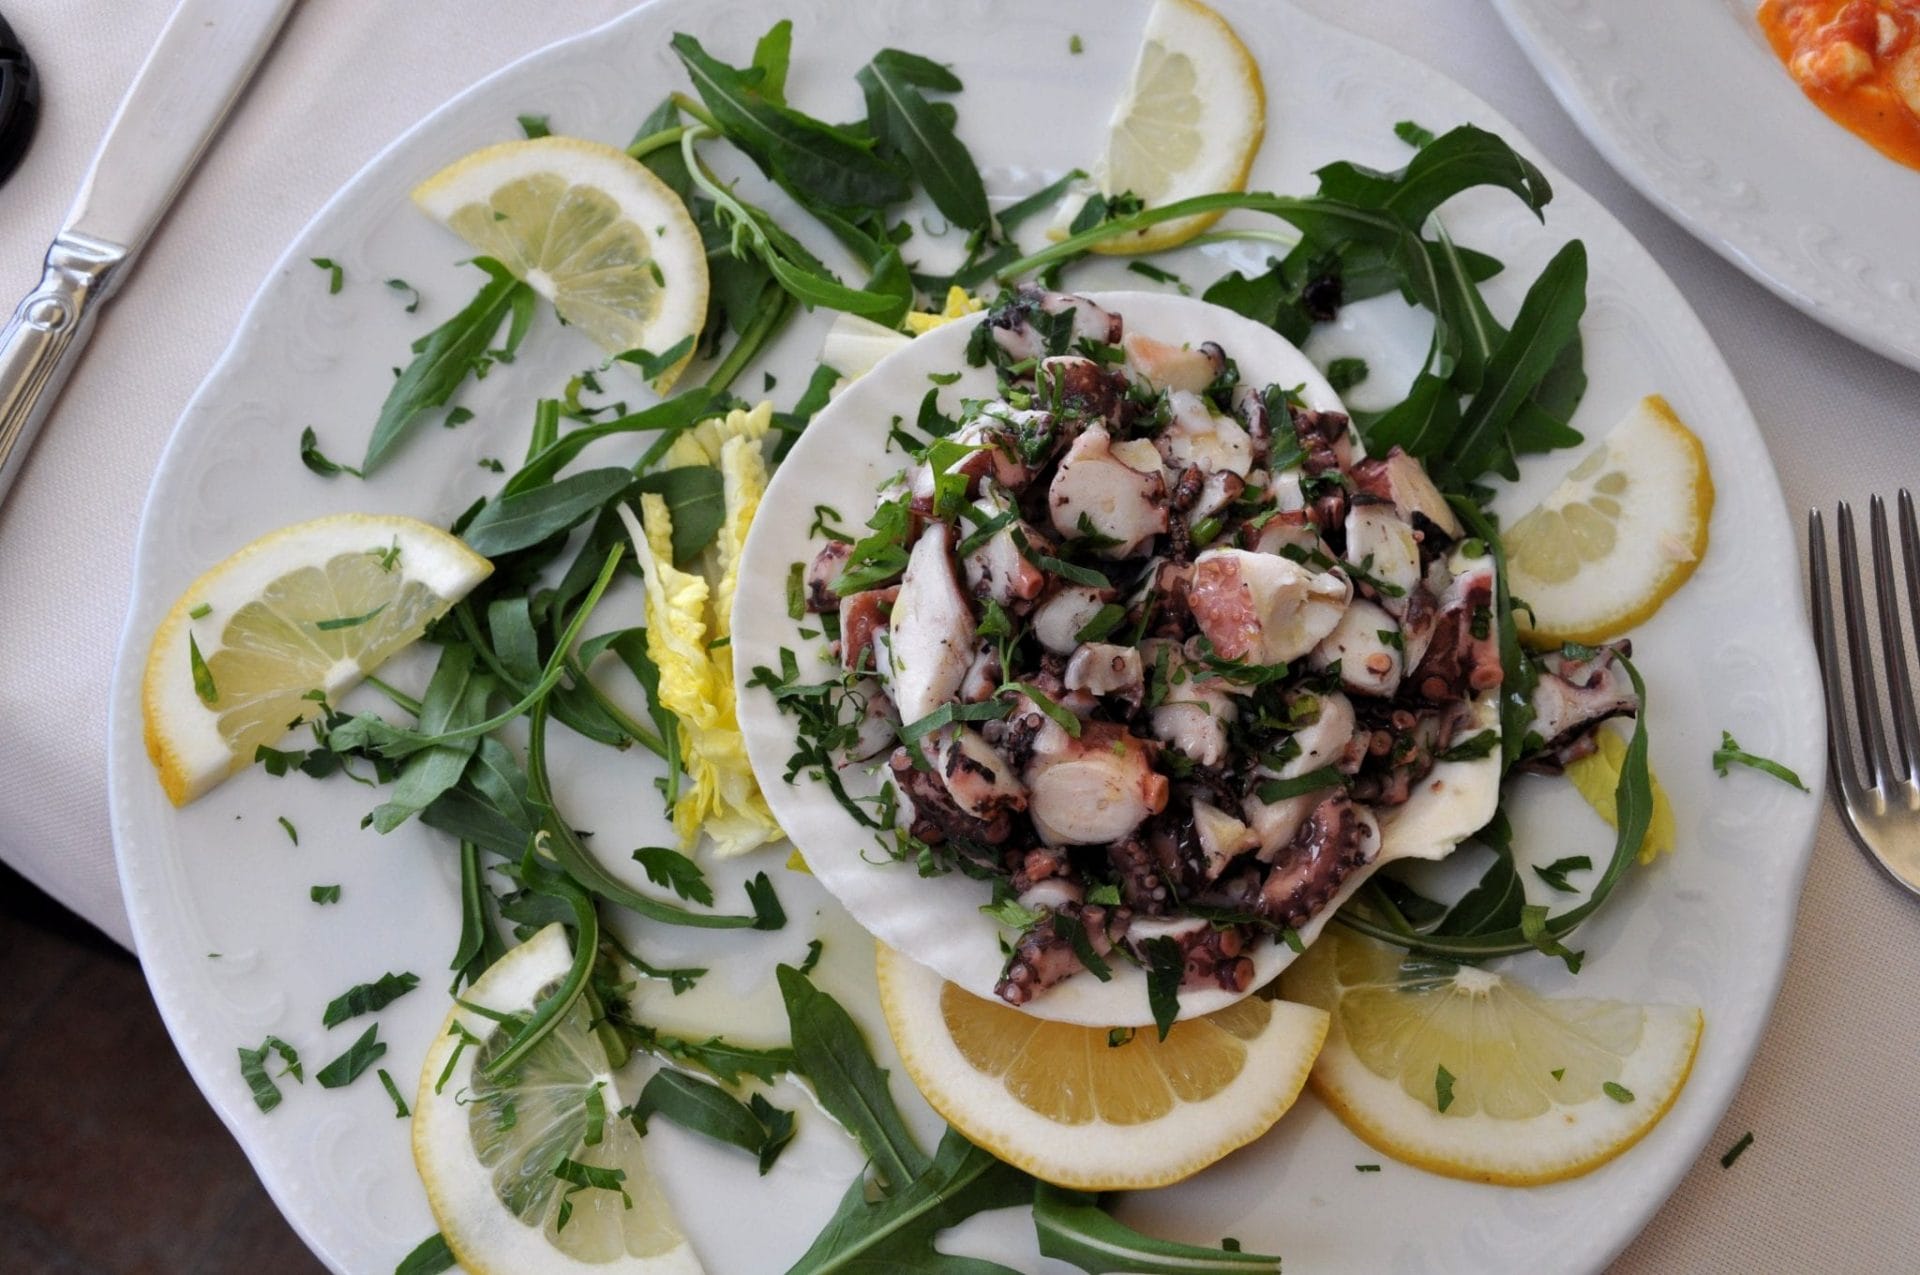 Octopus, a sustainable seafood in Italy